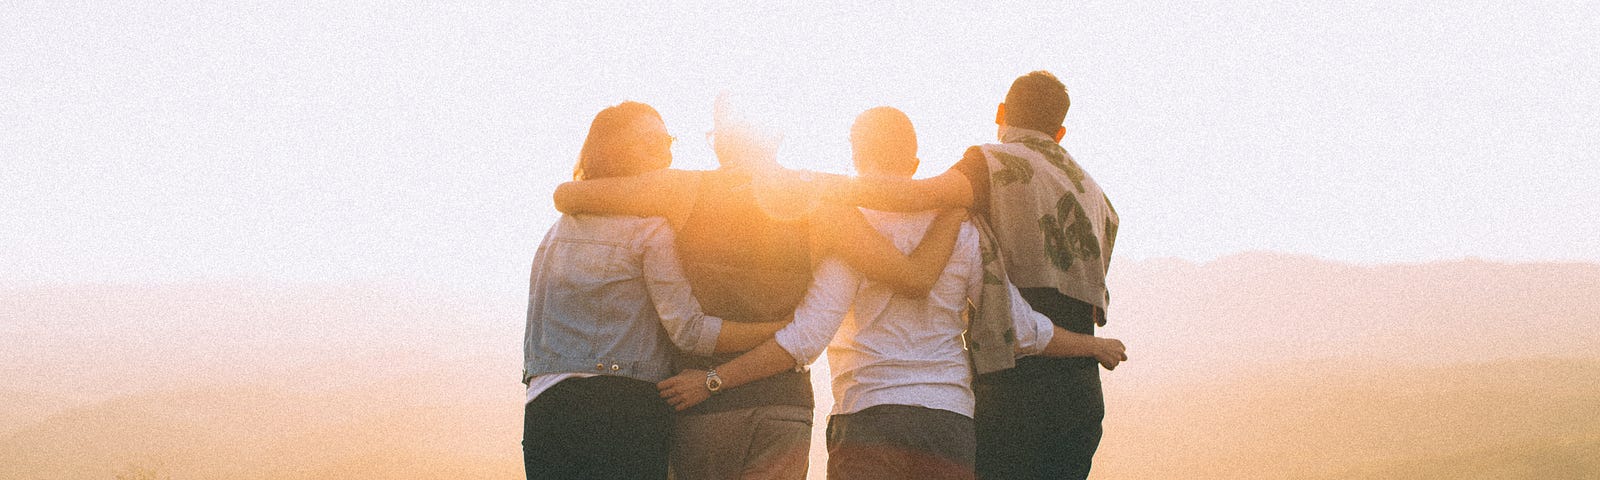 Four friends supporting each other with arms draped around their shoulders